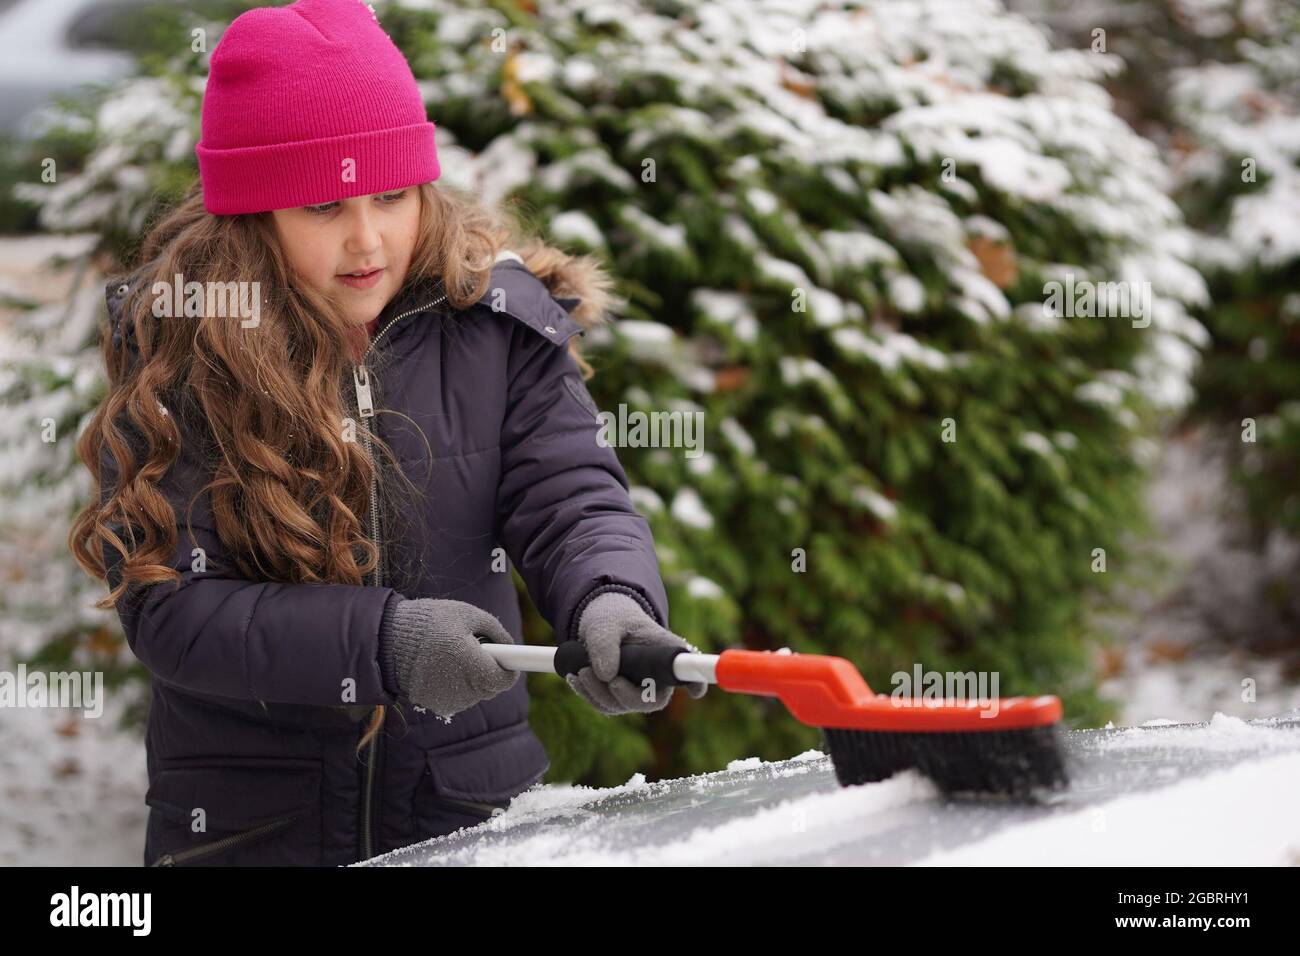 Adorable little curly girl helping to brush a snow from a car. Mommy's little helper. Winter activities for kids. Stock Photo